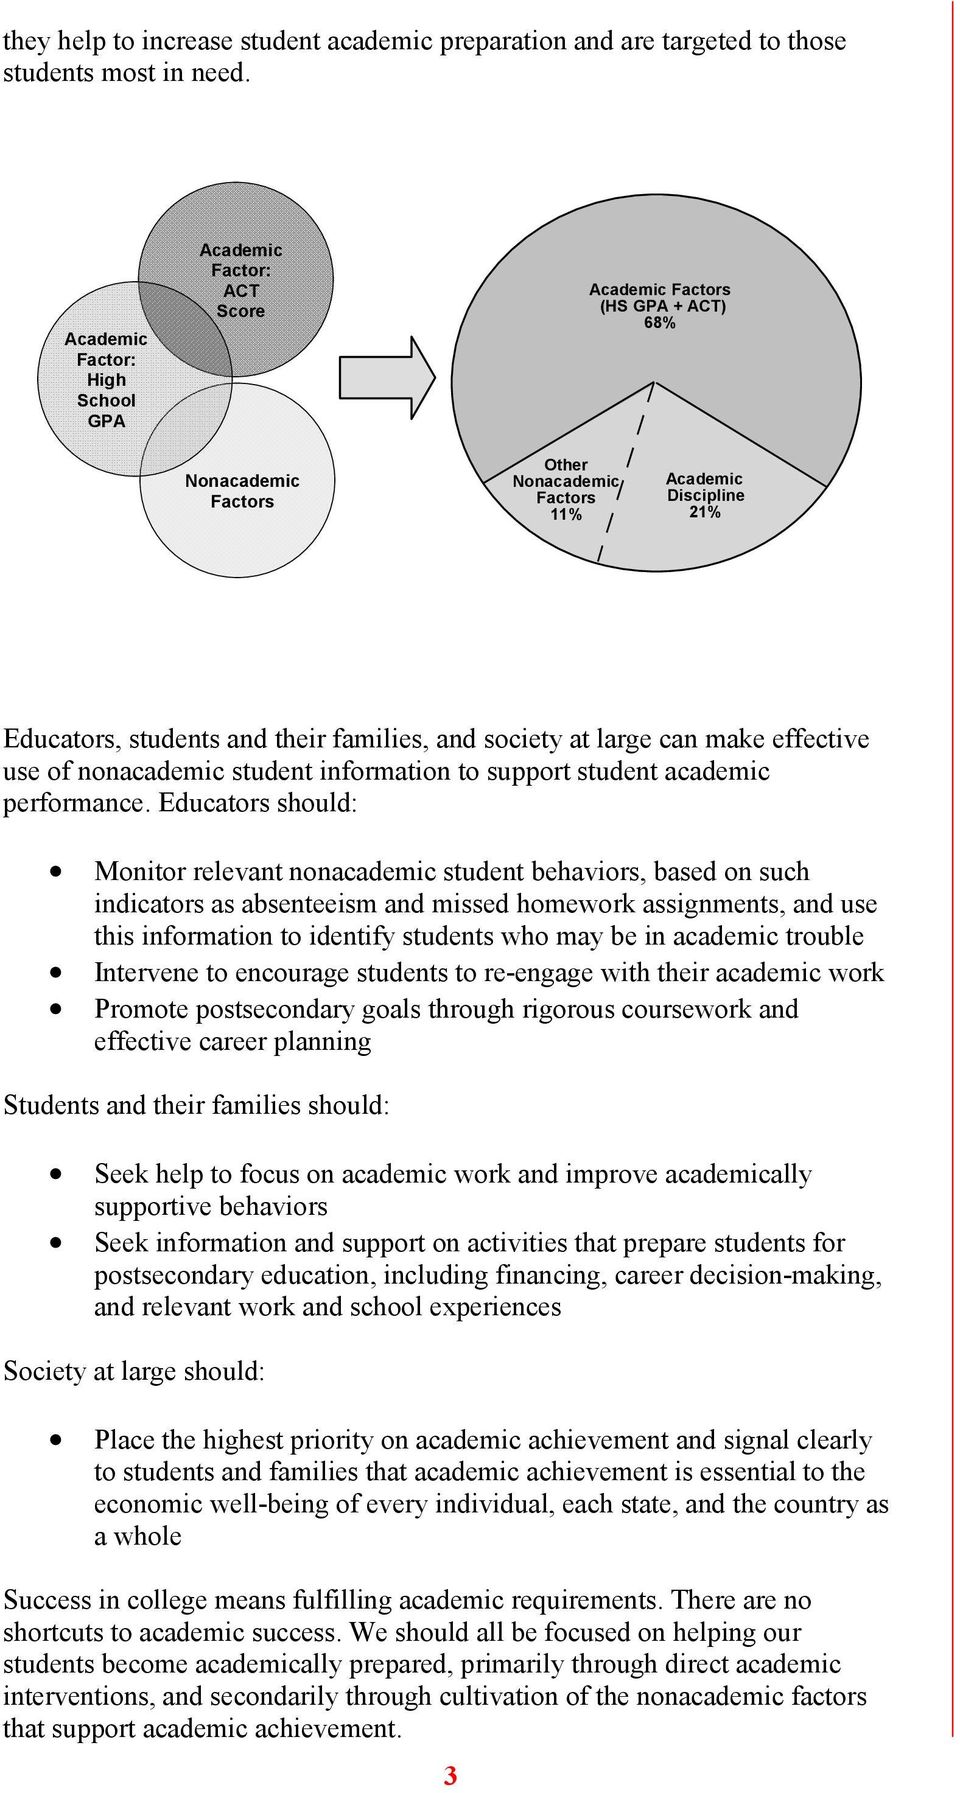 make effective use of nonacademic student information to support student academic performance.